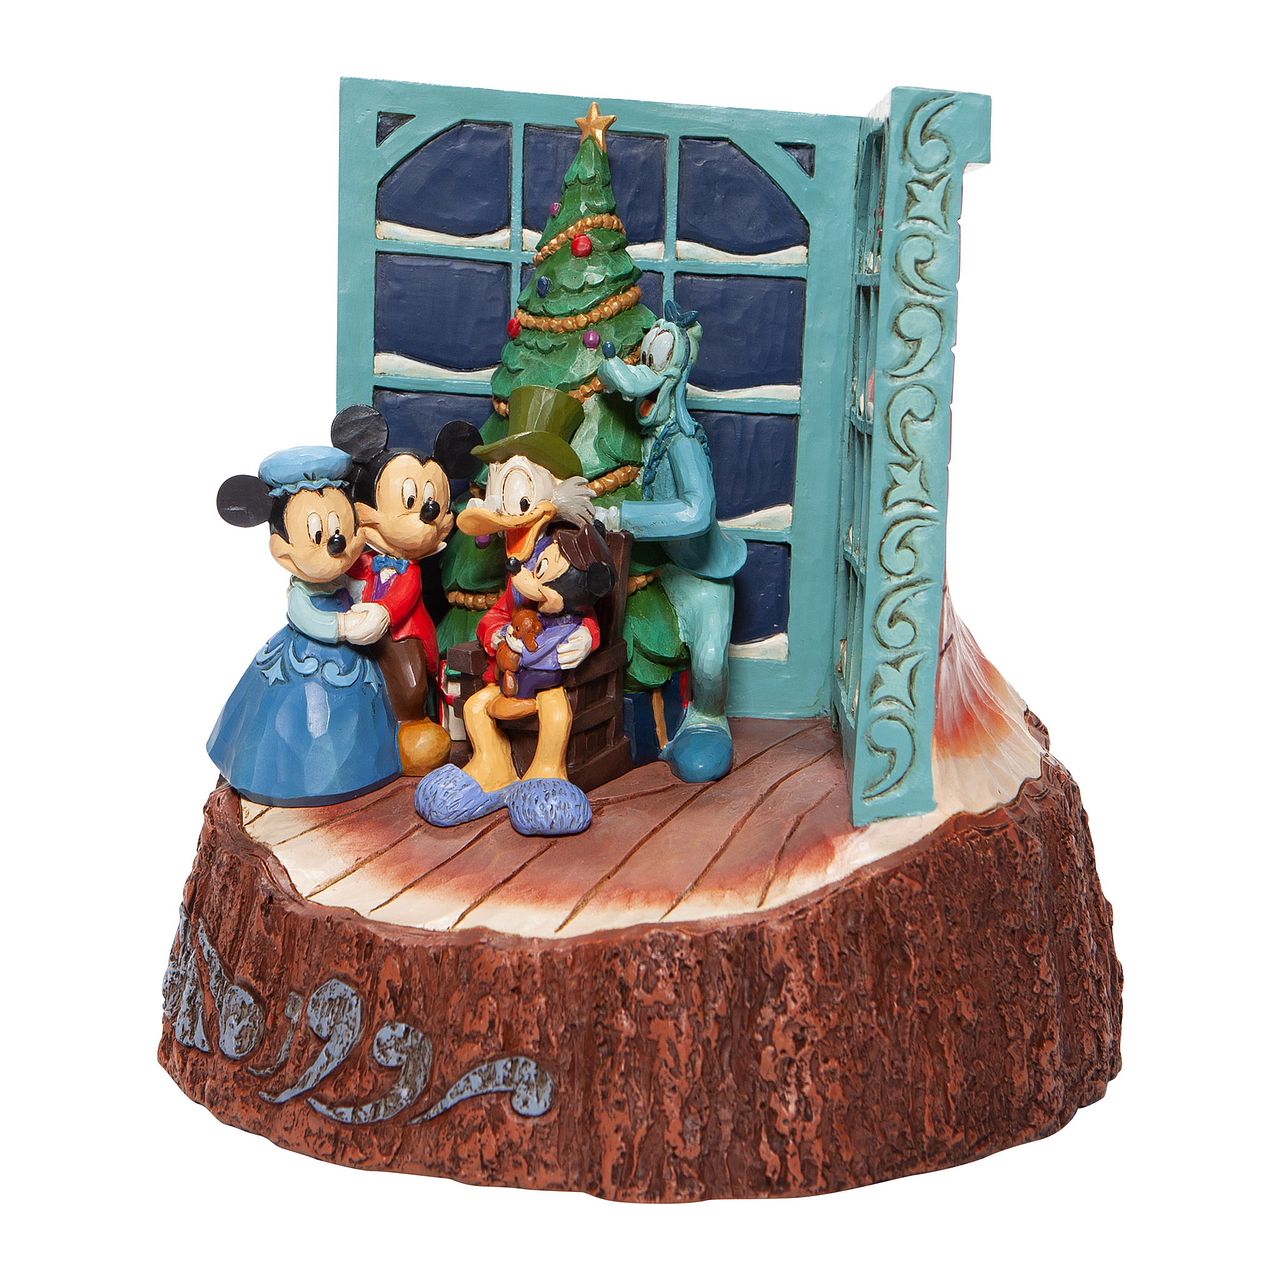 Jim Shore Mickey Mouse Christmas Carol Carved by Heart Figurine  Mickey and family gather around the tree to witness a Christmas Carol retelling by Scrooge McDuck. With windows alight with narrative imagery, they're in for a treat celebrating Christmas past, present and future in this nostalgic design by Jim Shore.